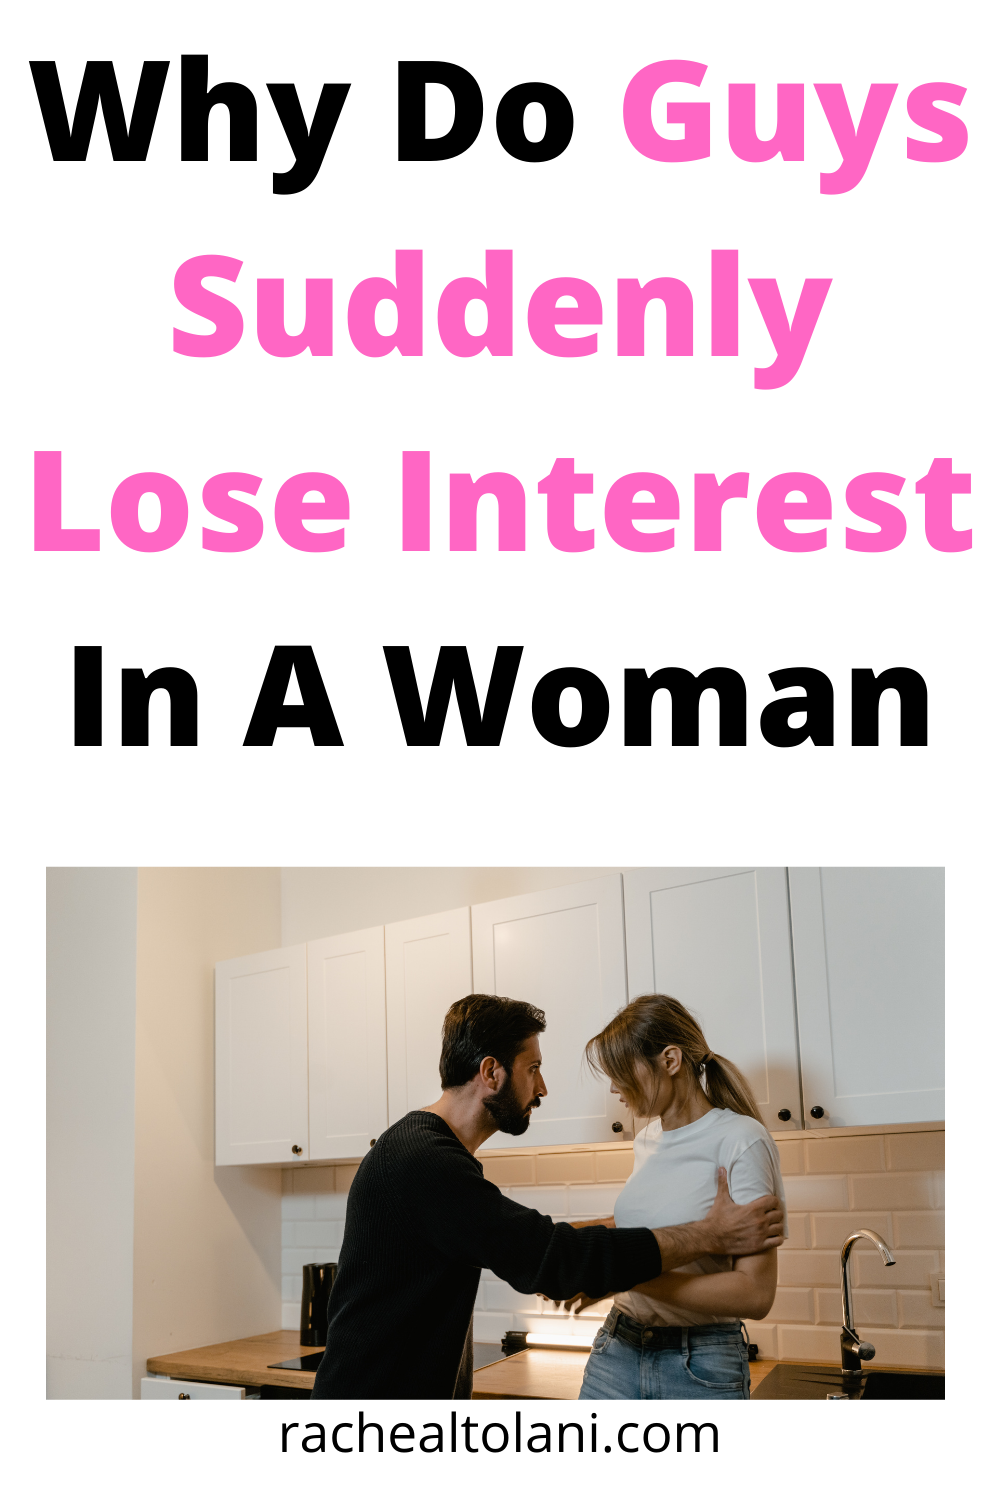 Why Do People Lose Interest So Quickly After A Date?